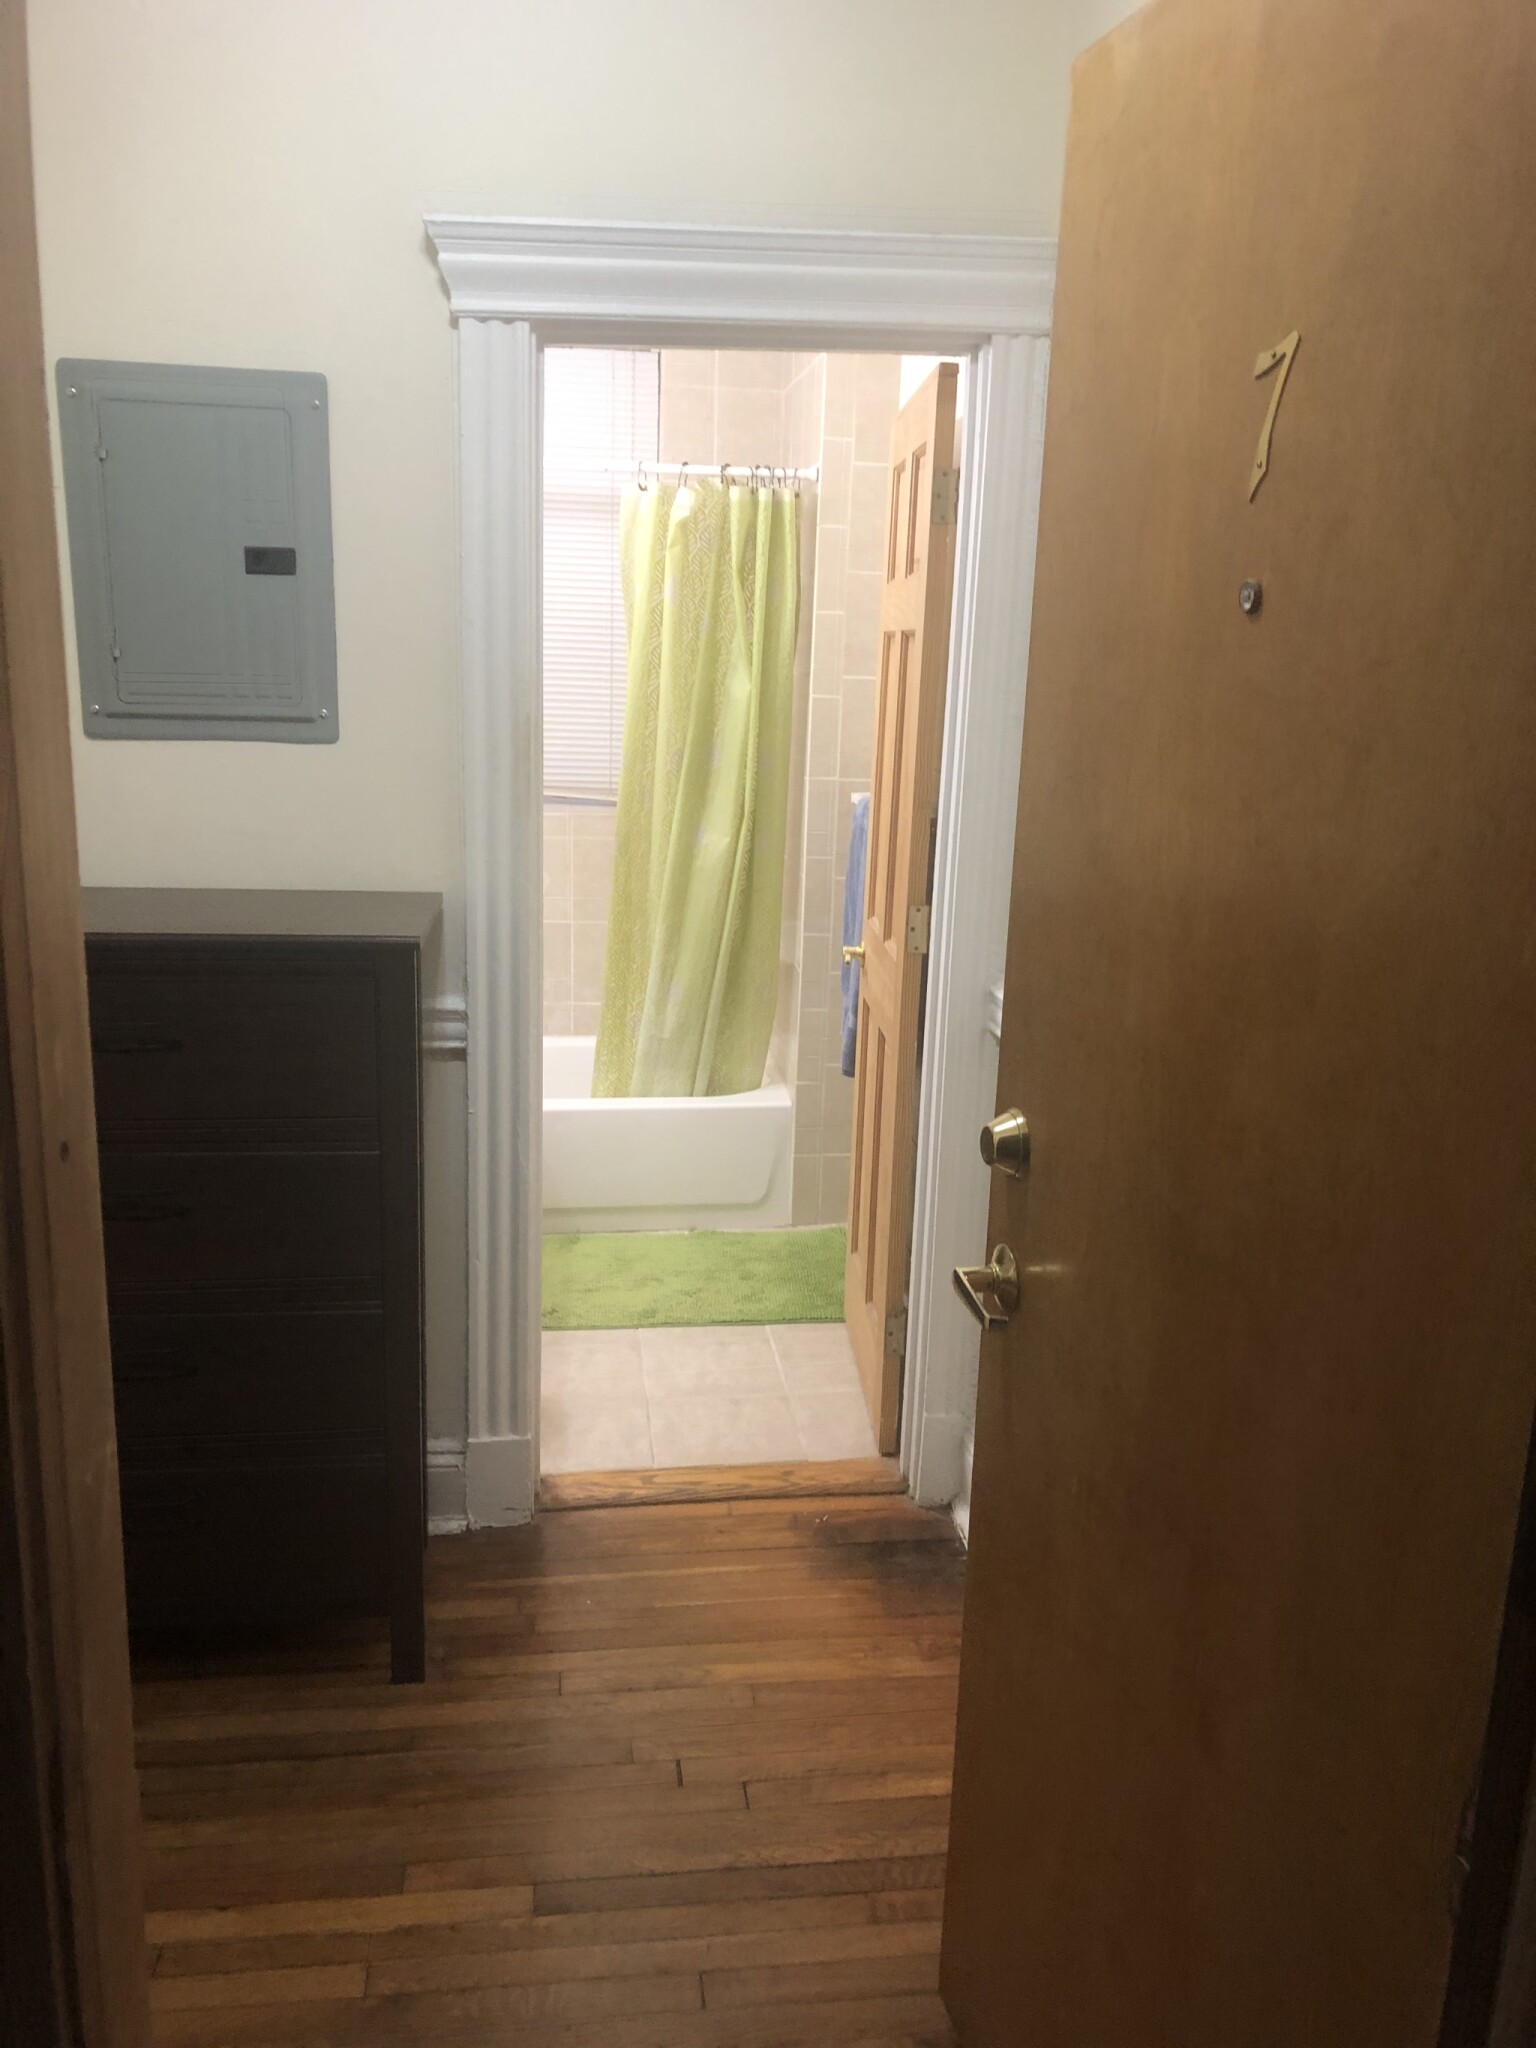 Photos of apartment on Hereford,Boston MA 02115